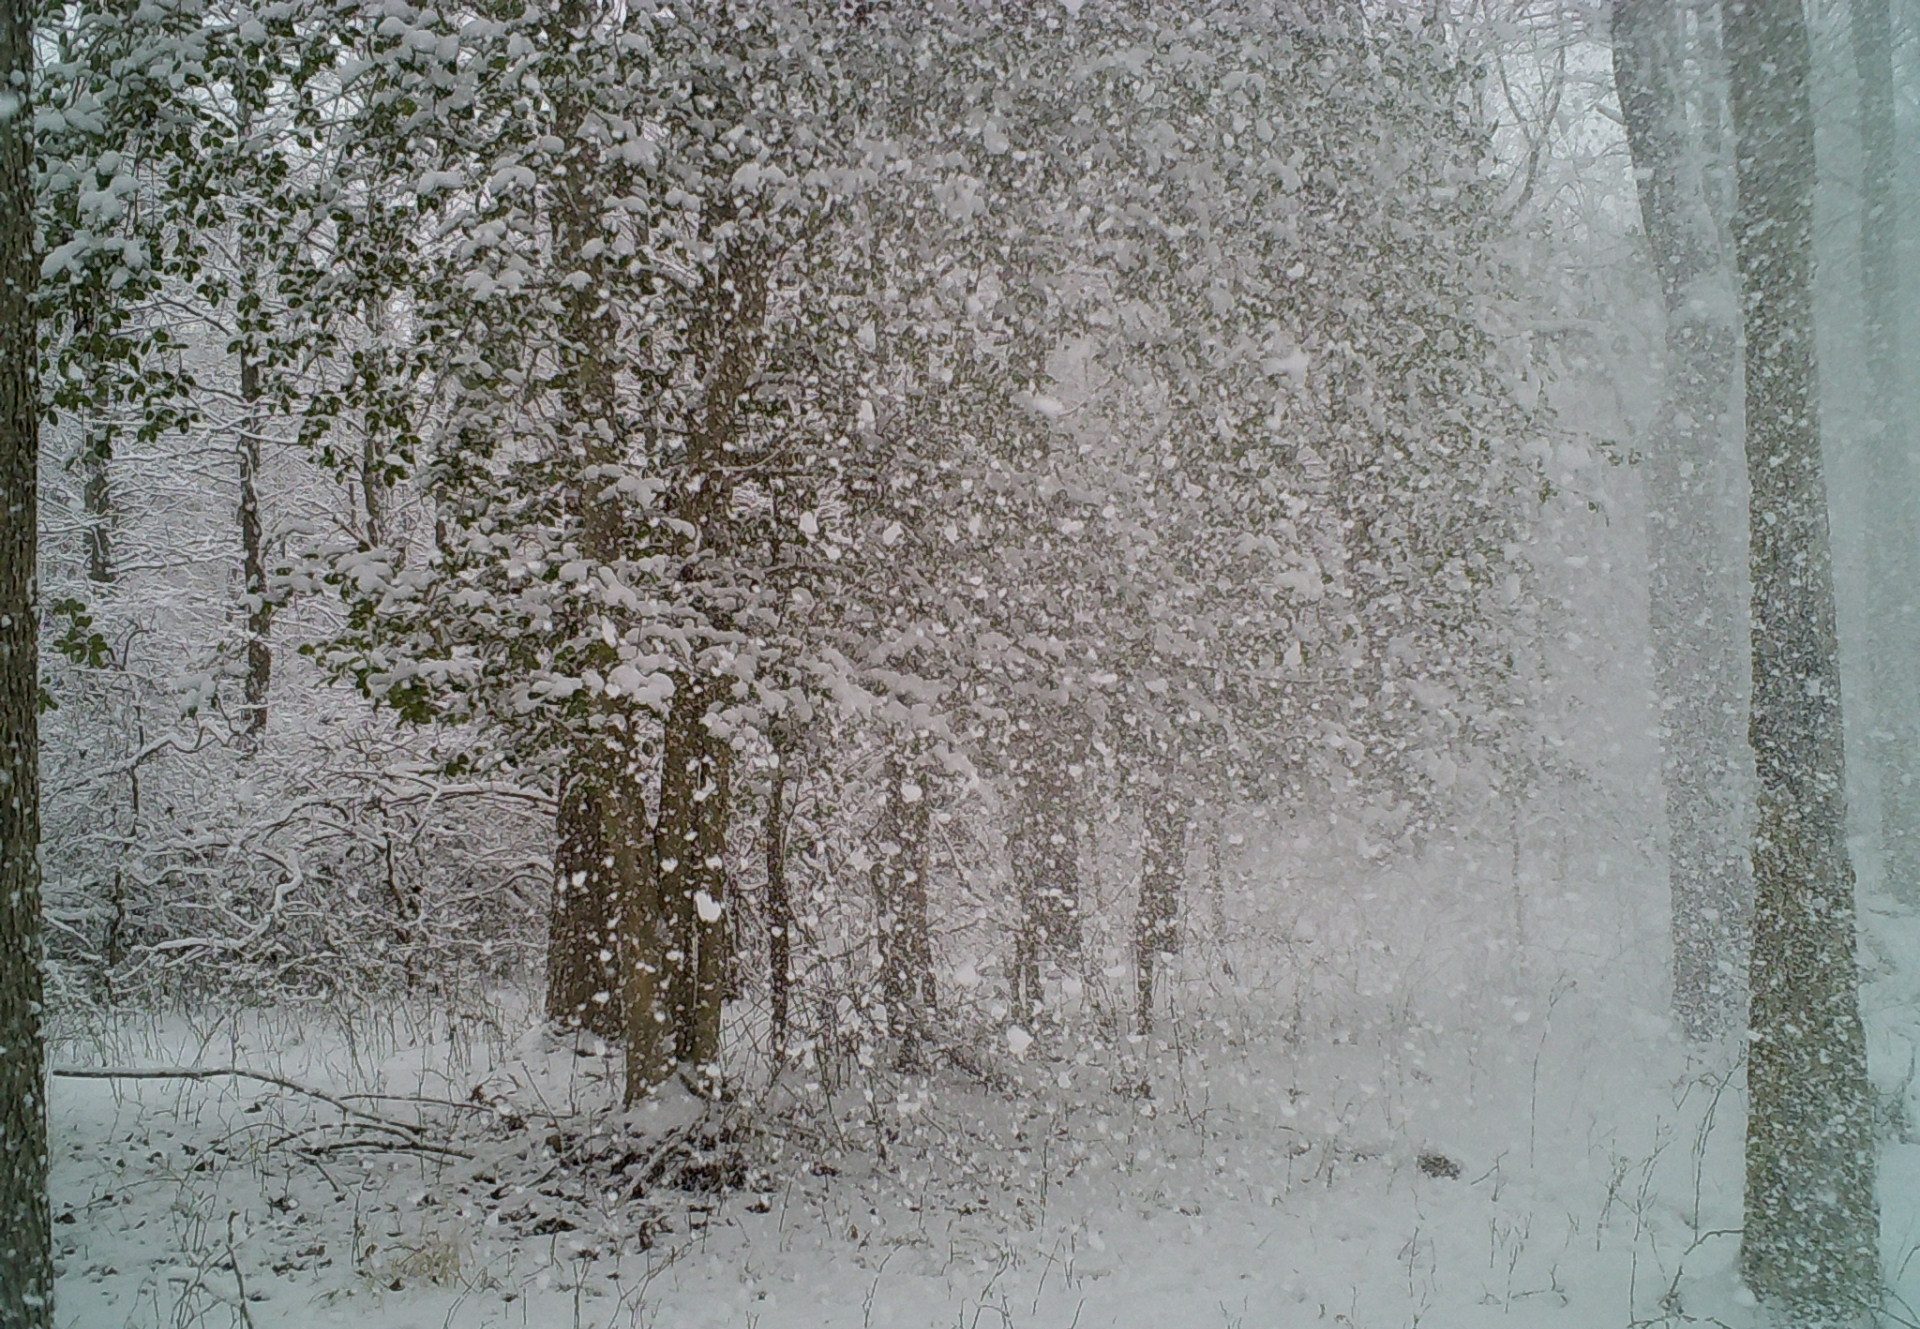 Snow falling in the woods during a storm